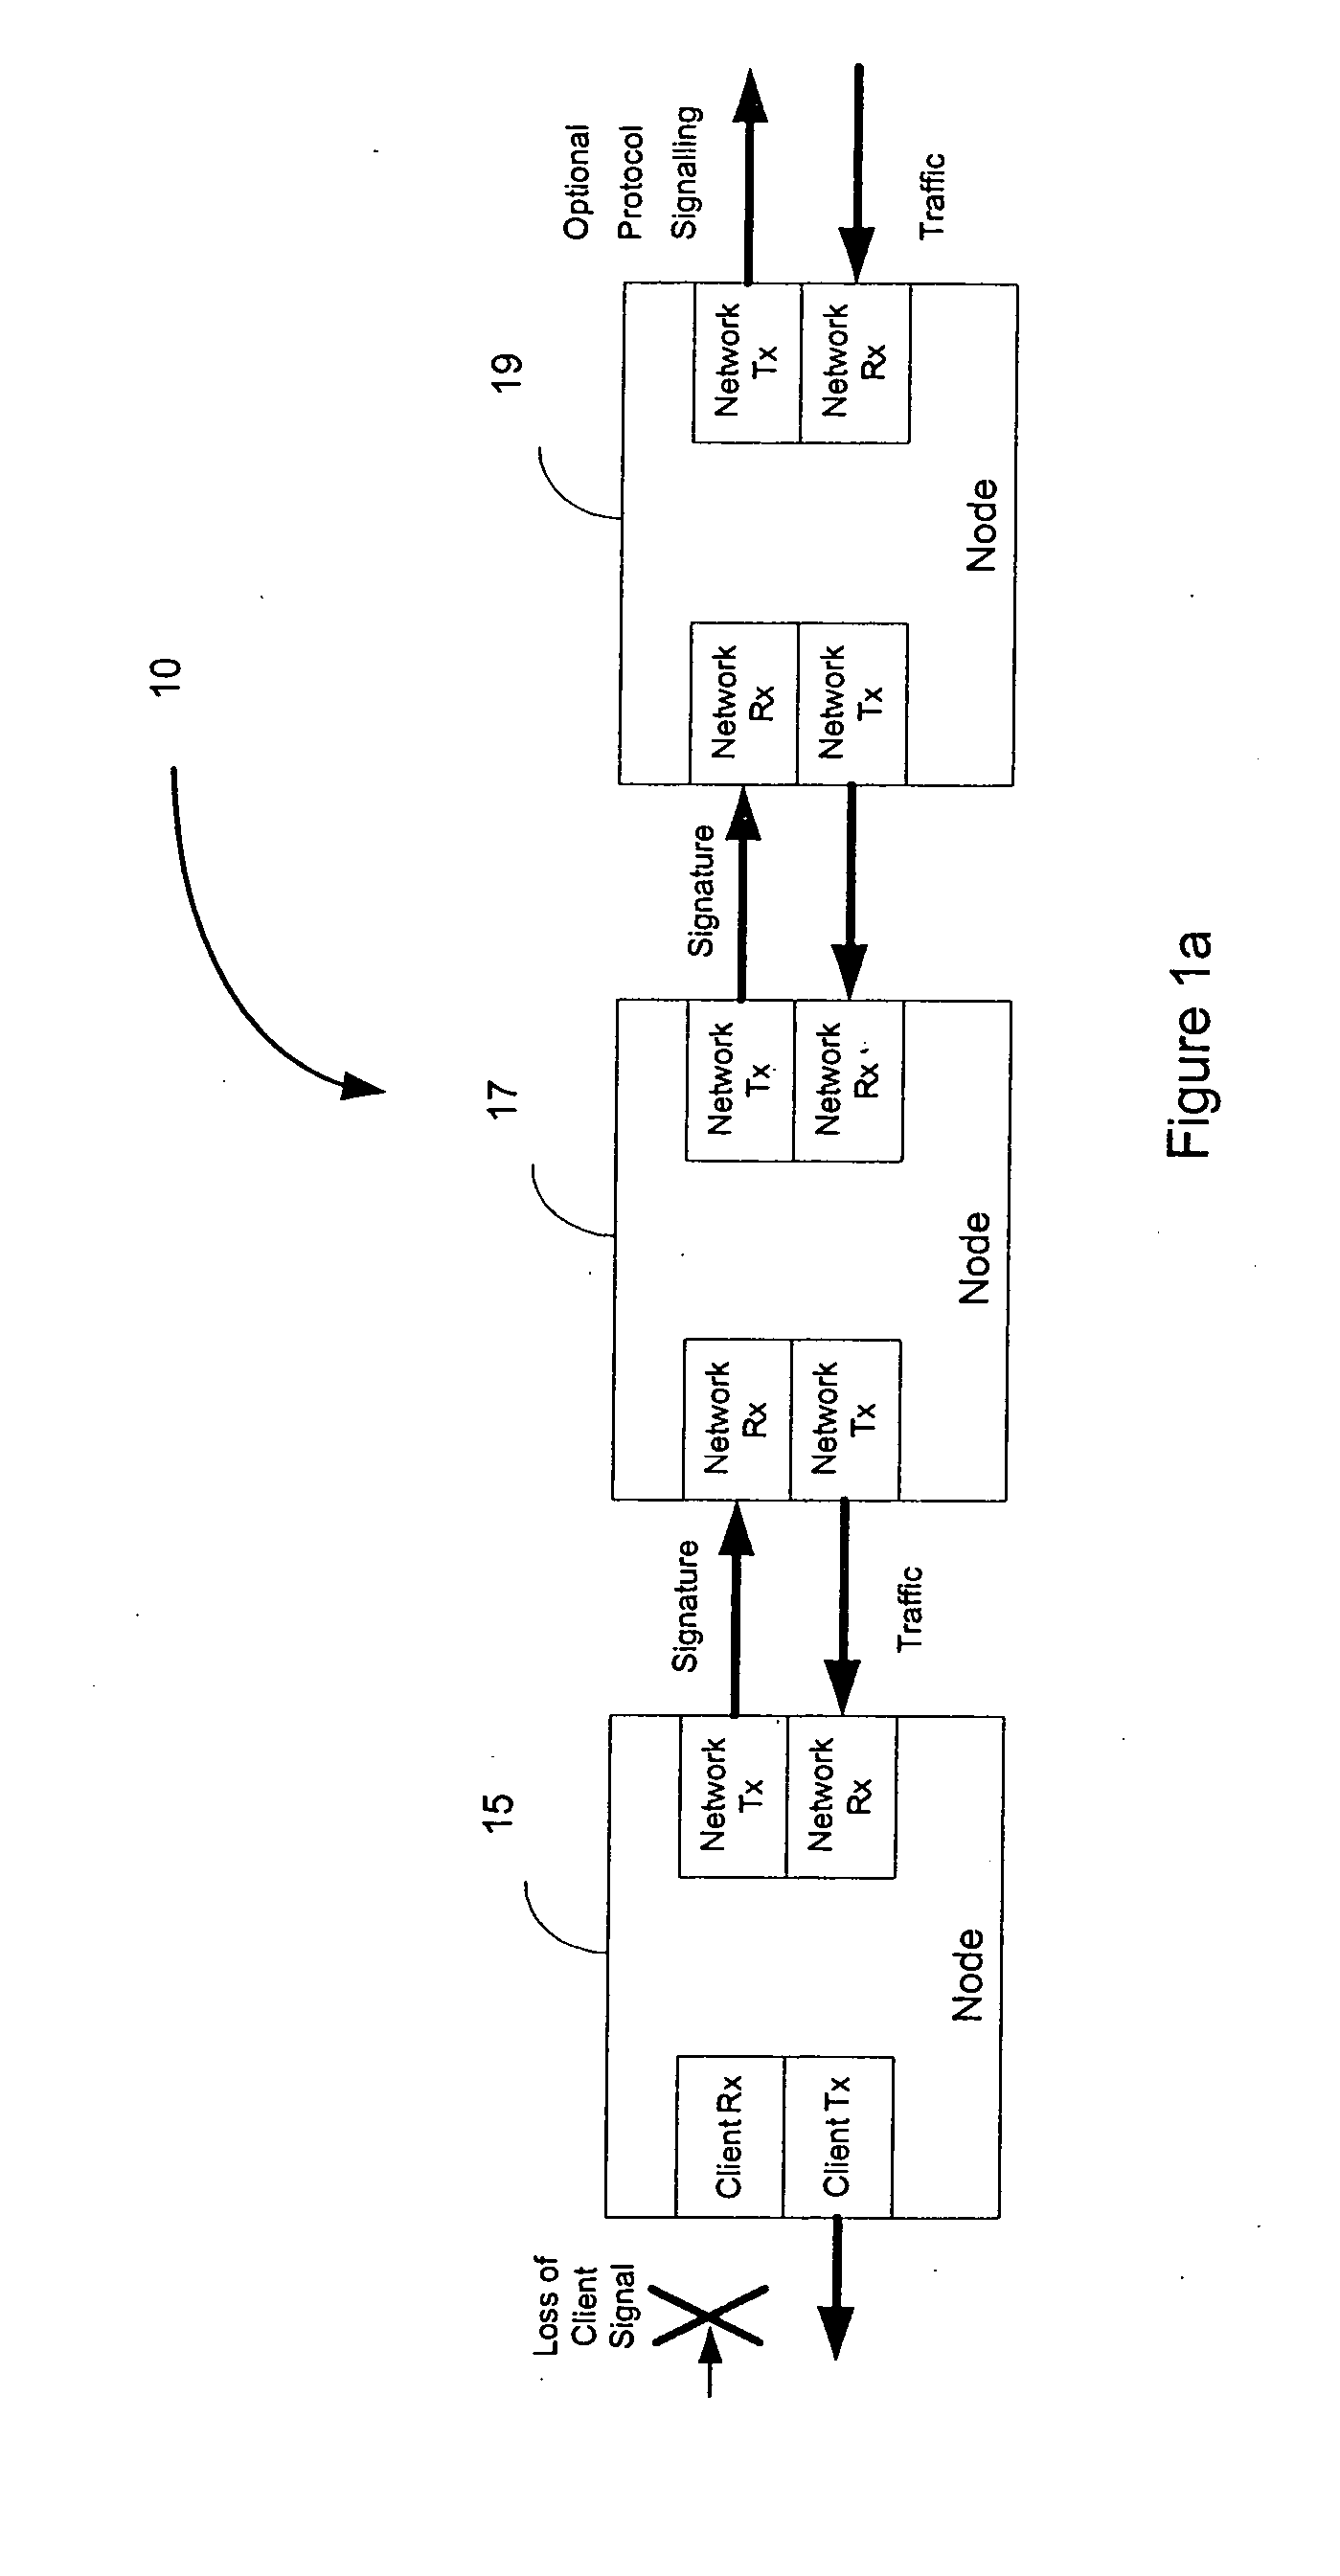 Method and system for providing a signature signal in an optical network in the event of loss of a client